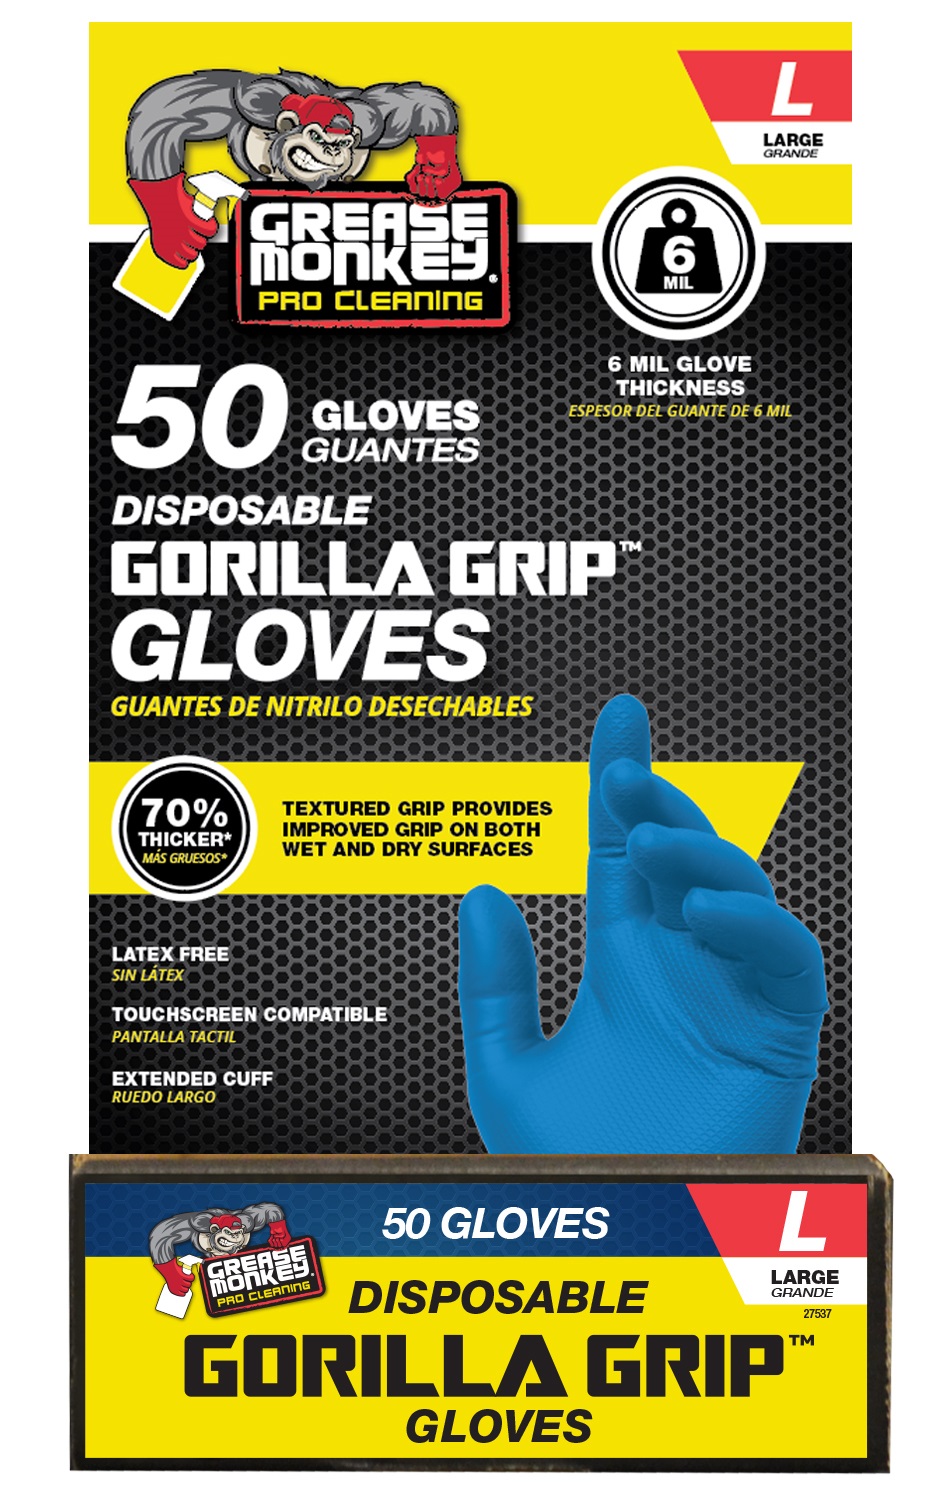 Grease Monkey Pro Cleaning, Disposable Nitrile Gloves, Blue, 50 Count Traction Grip, Male, Large - image 1 of 6